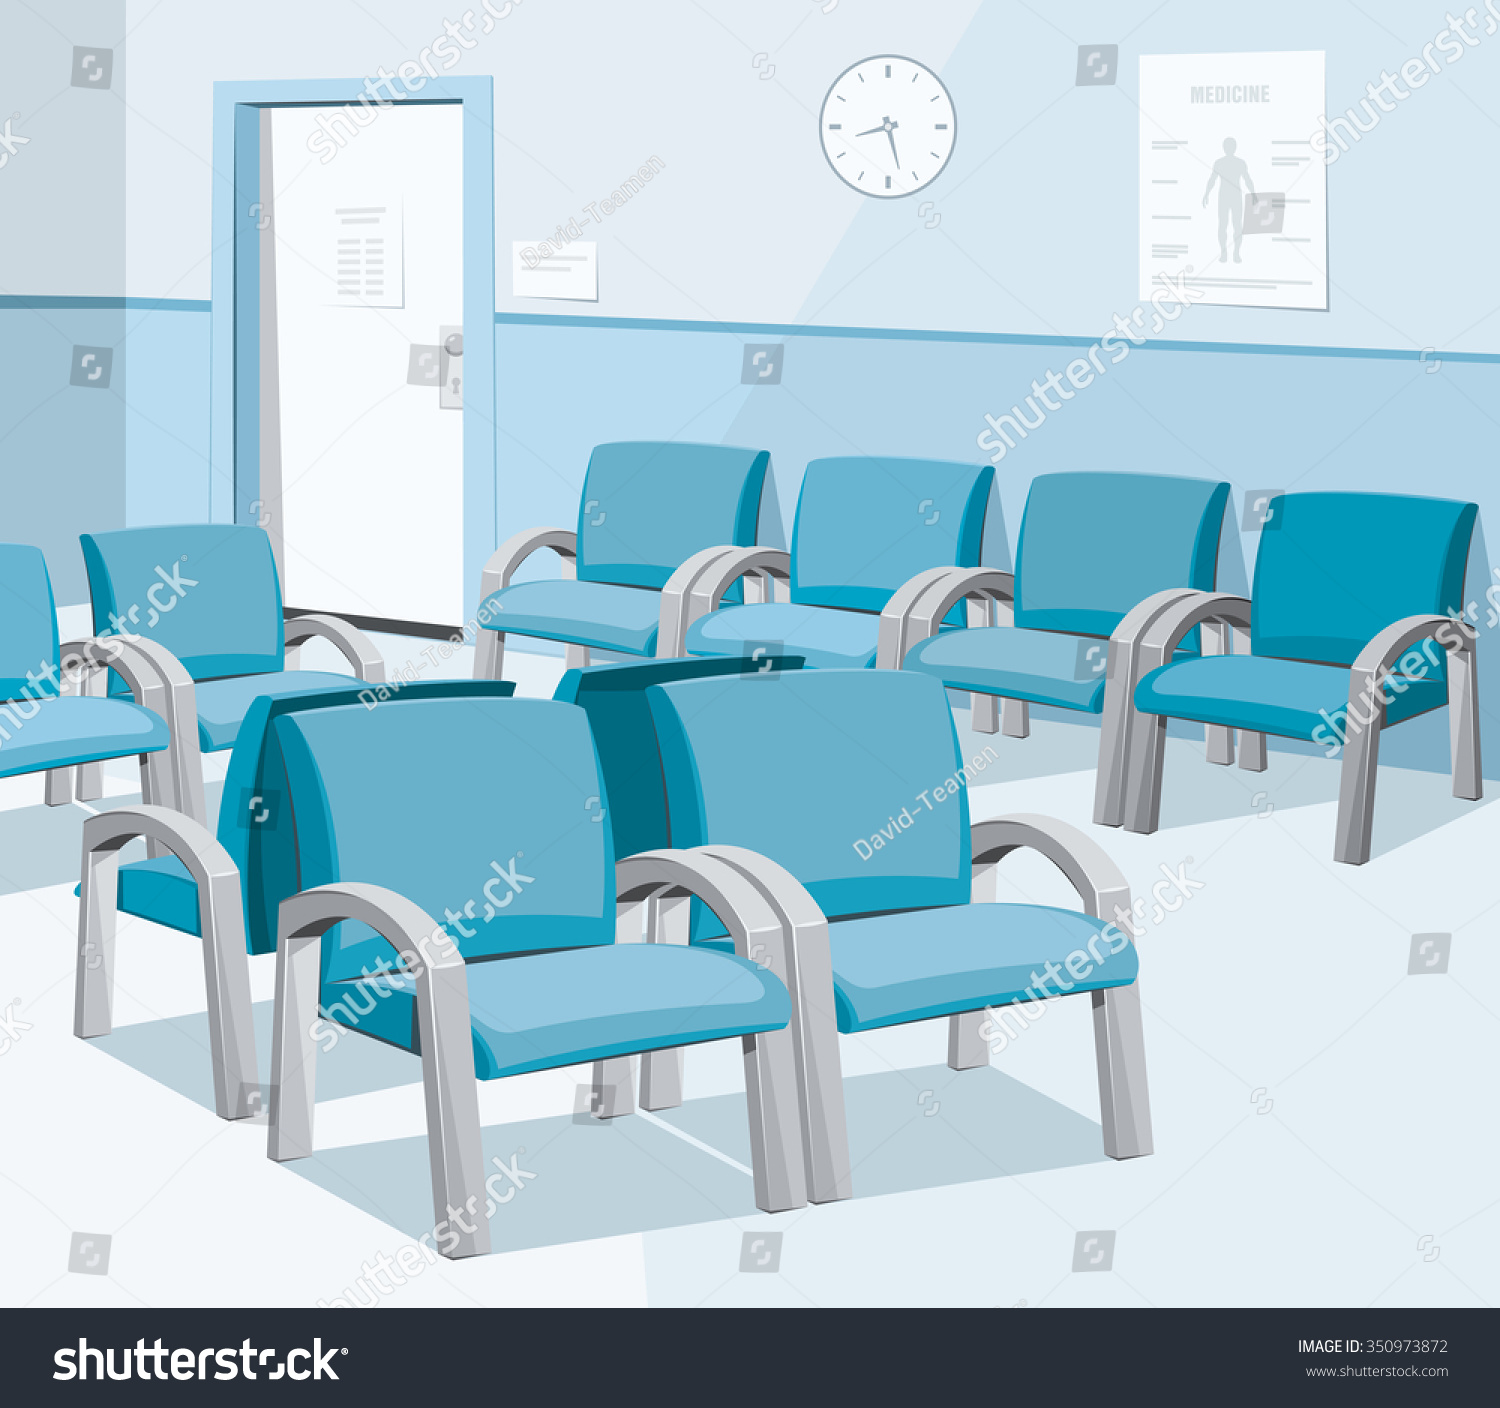 clipart waiting room - photo #22